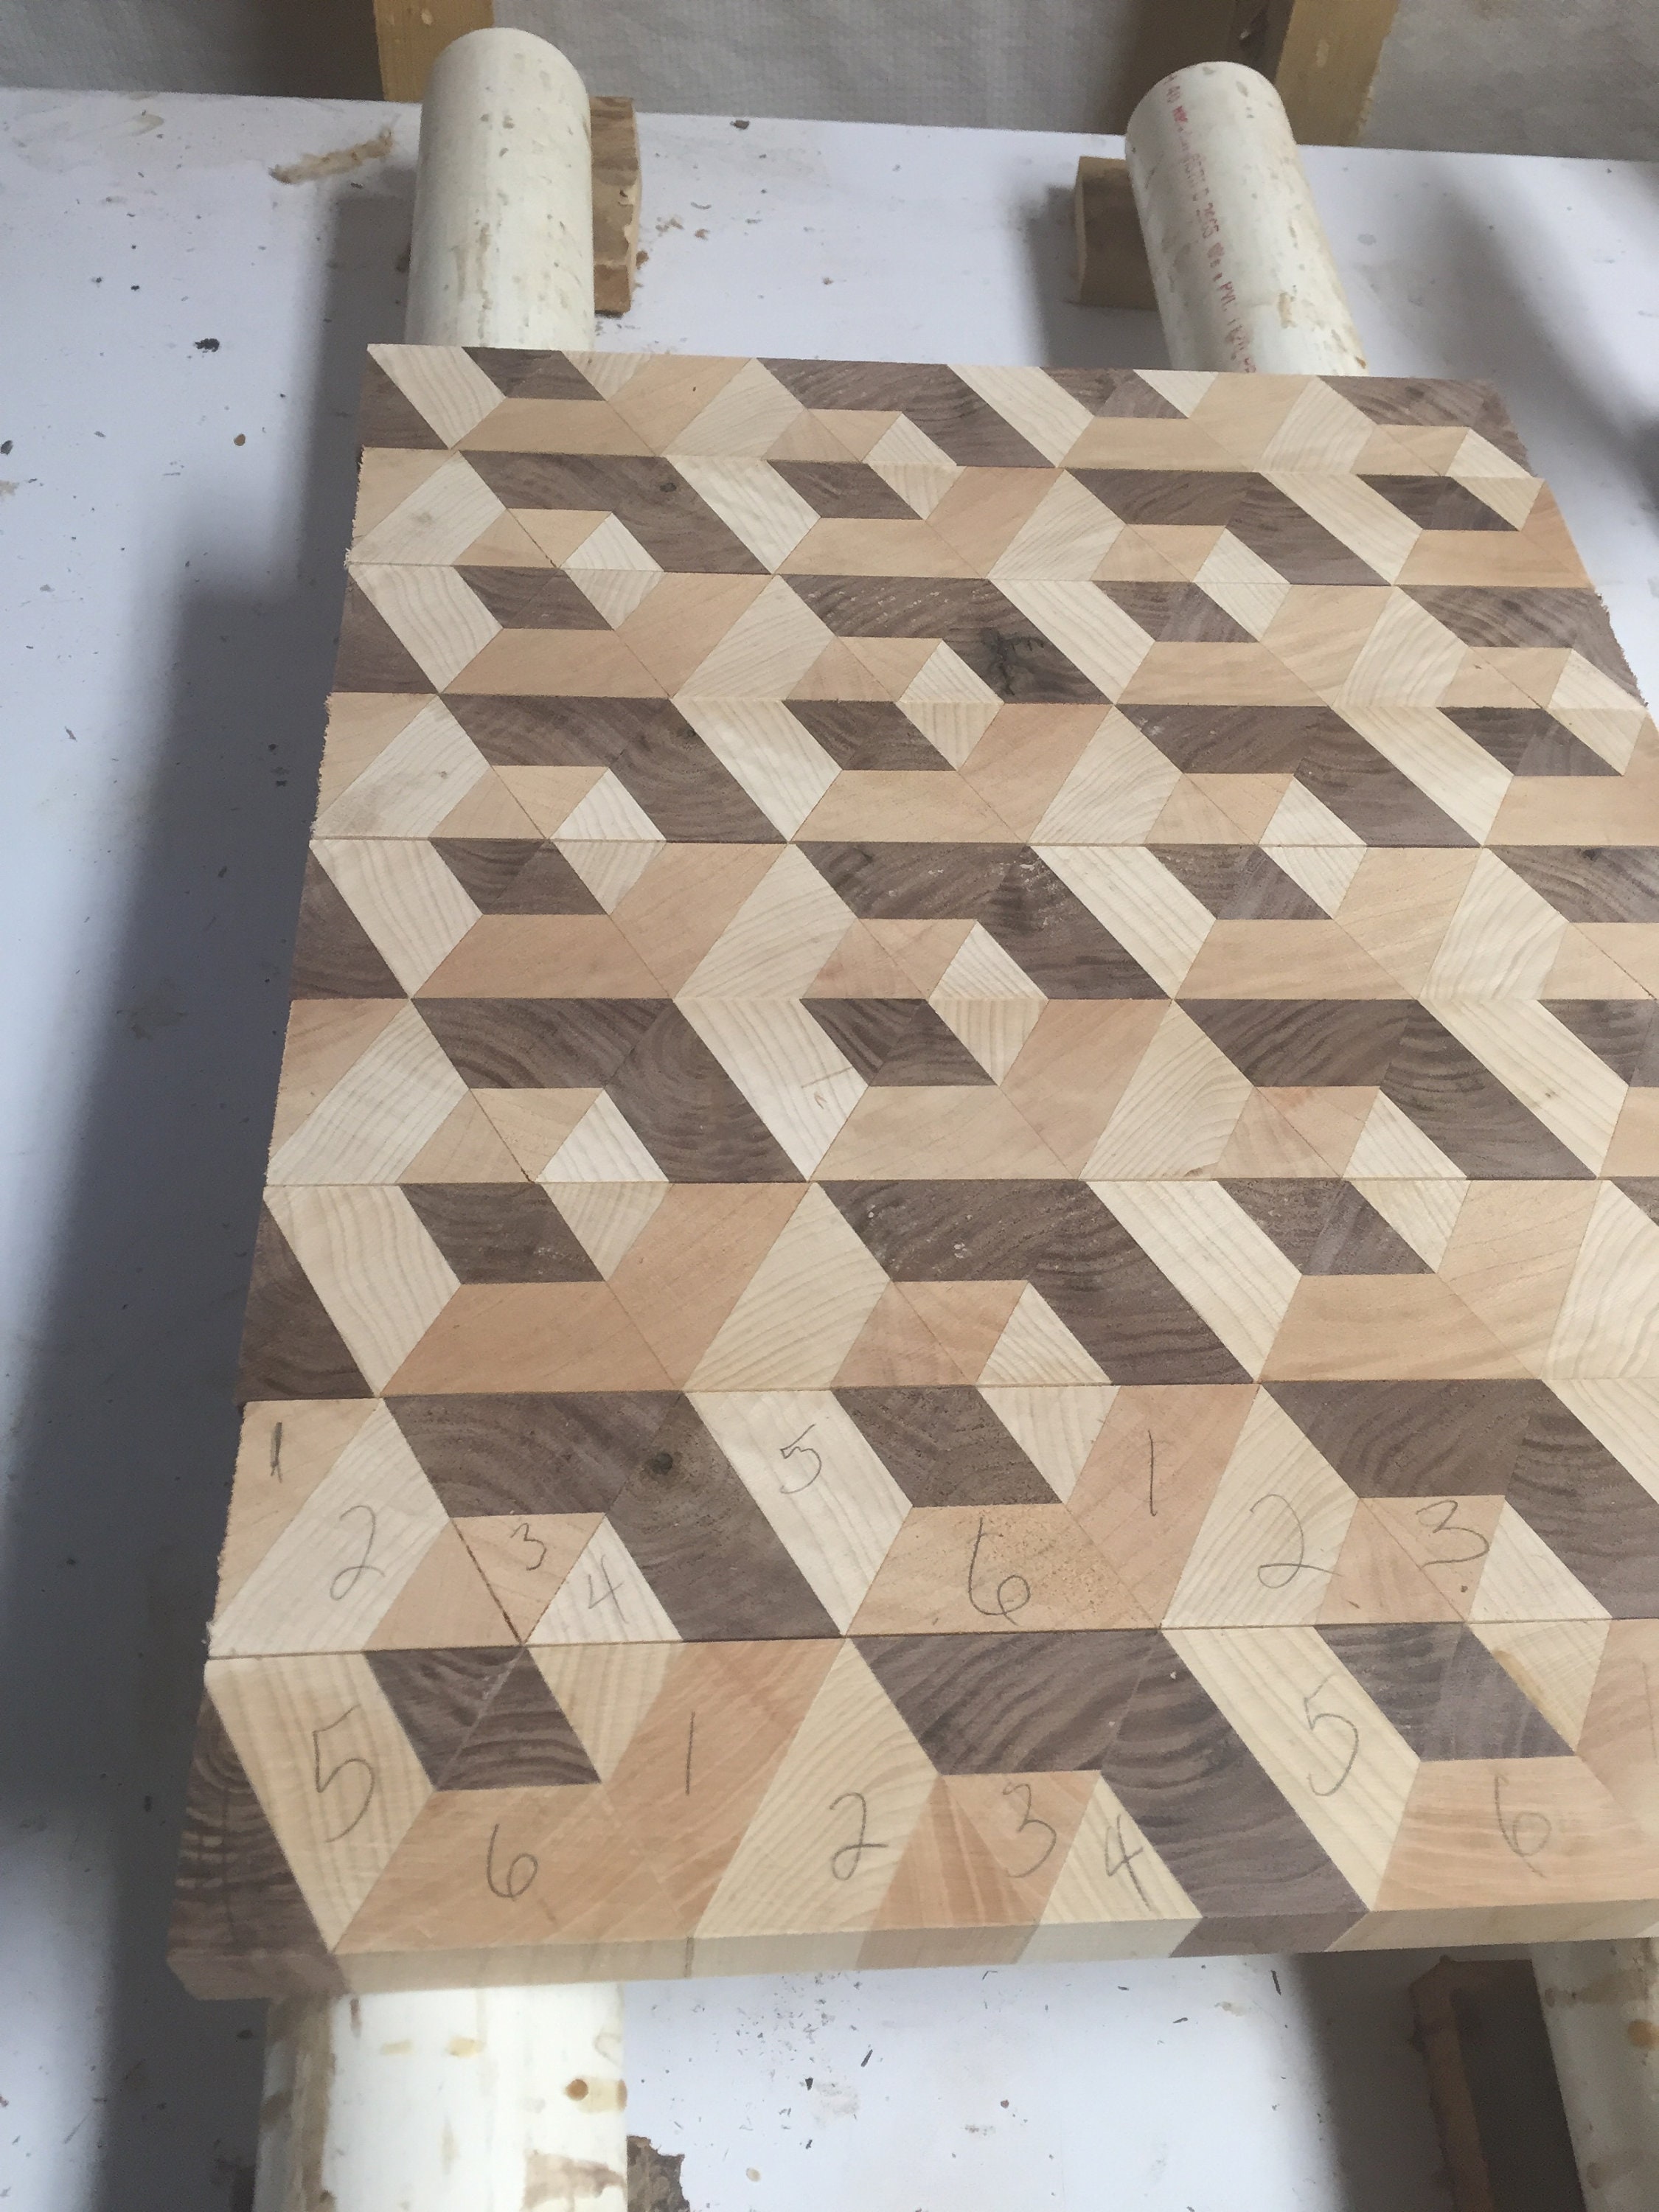 Woodworking: How to Make a Woven Cutting Board 